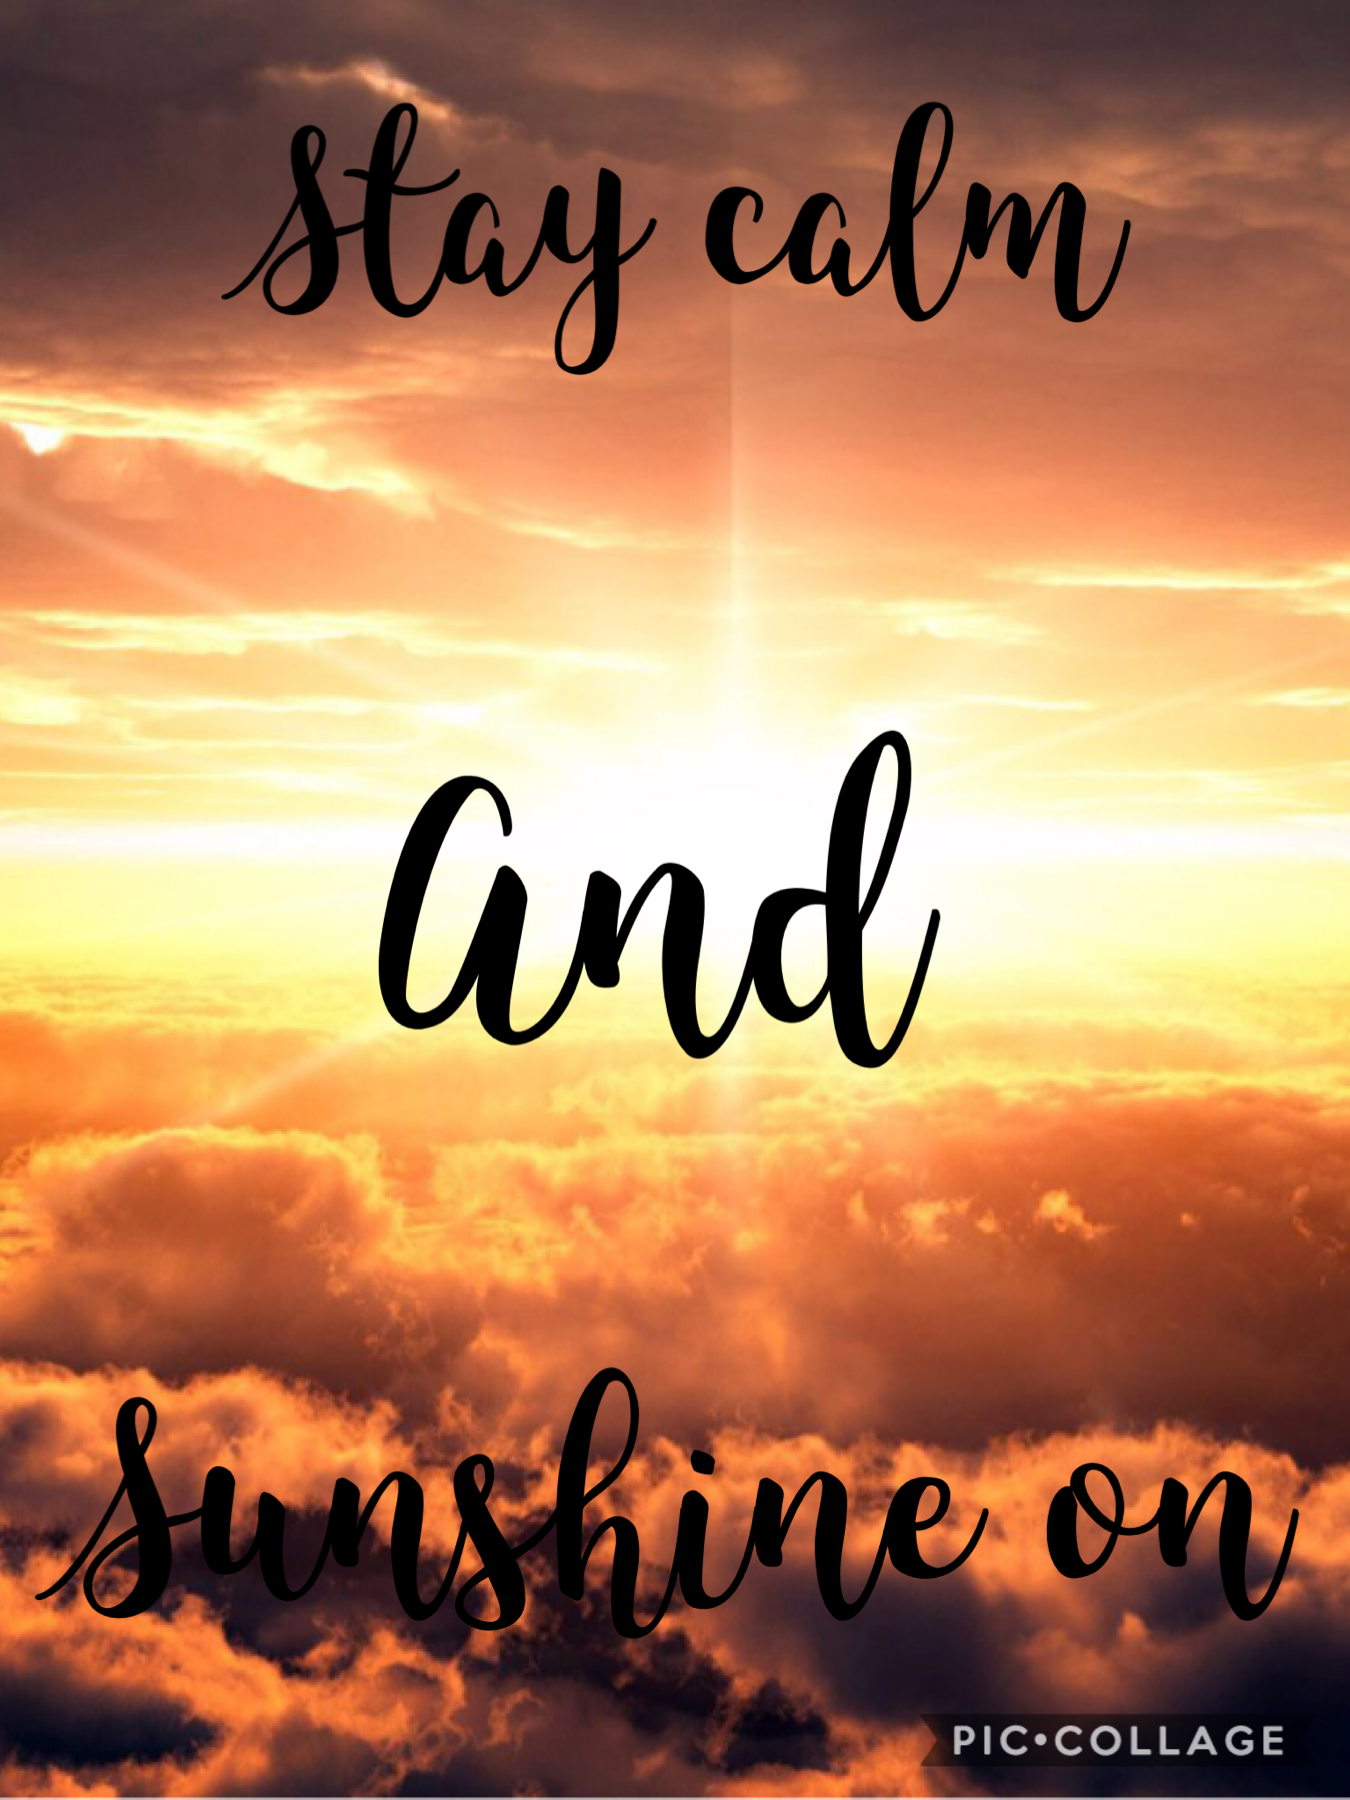 Stay calm and sunshine on! 😁😁